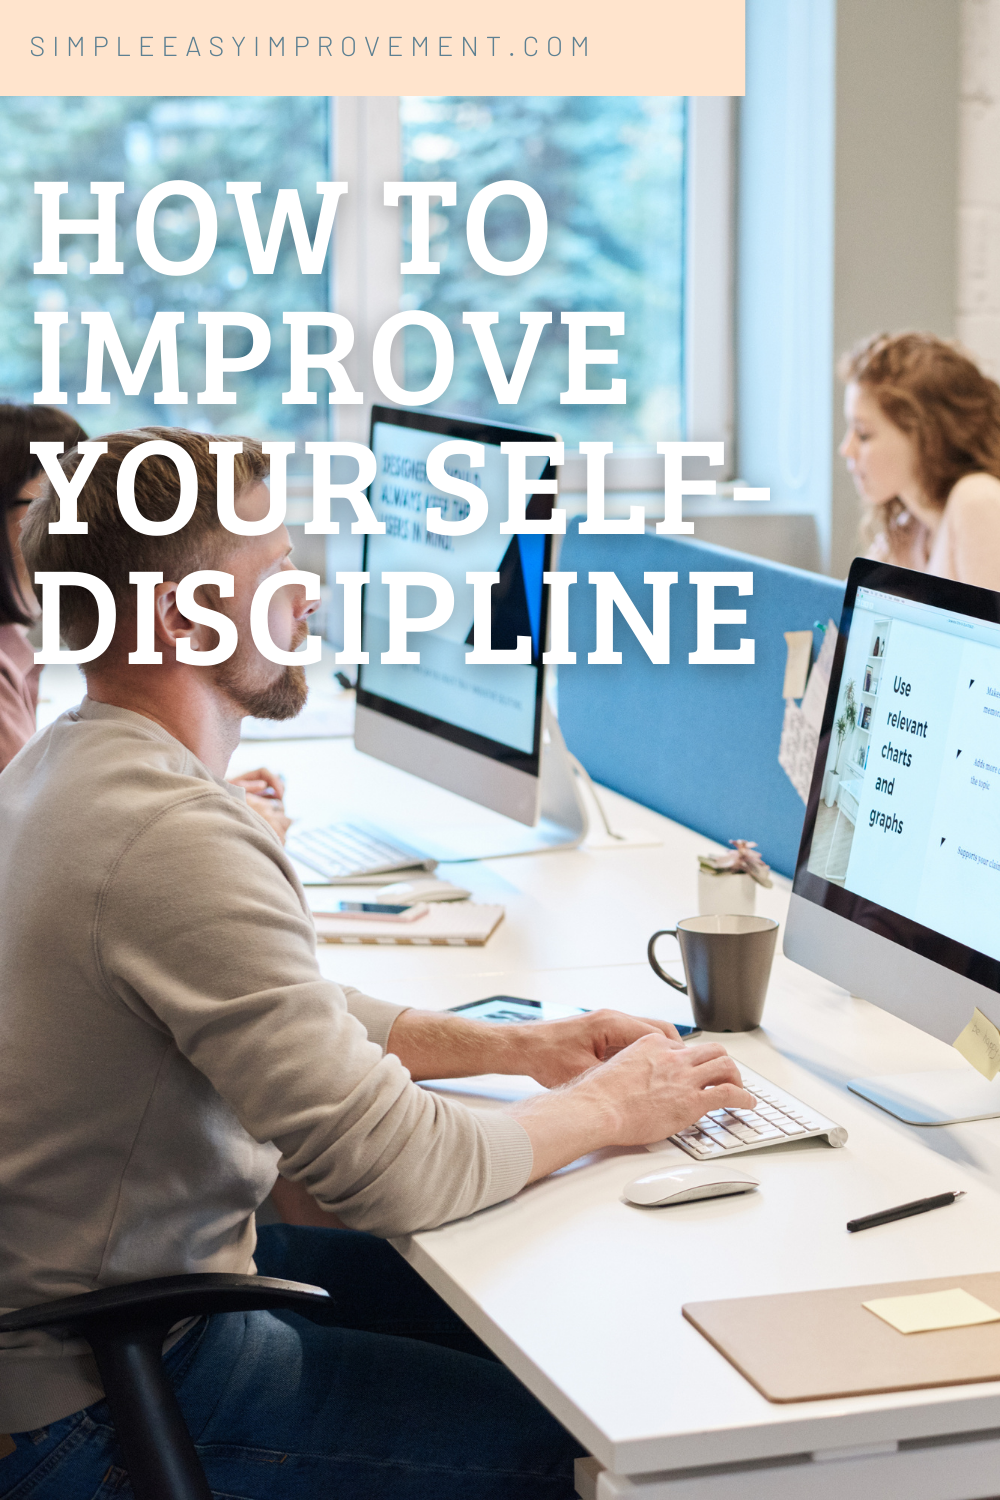 Improve Your SelfDiscipline Guide Learn to control yourself properly.